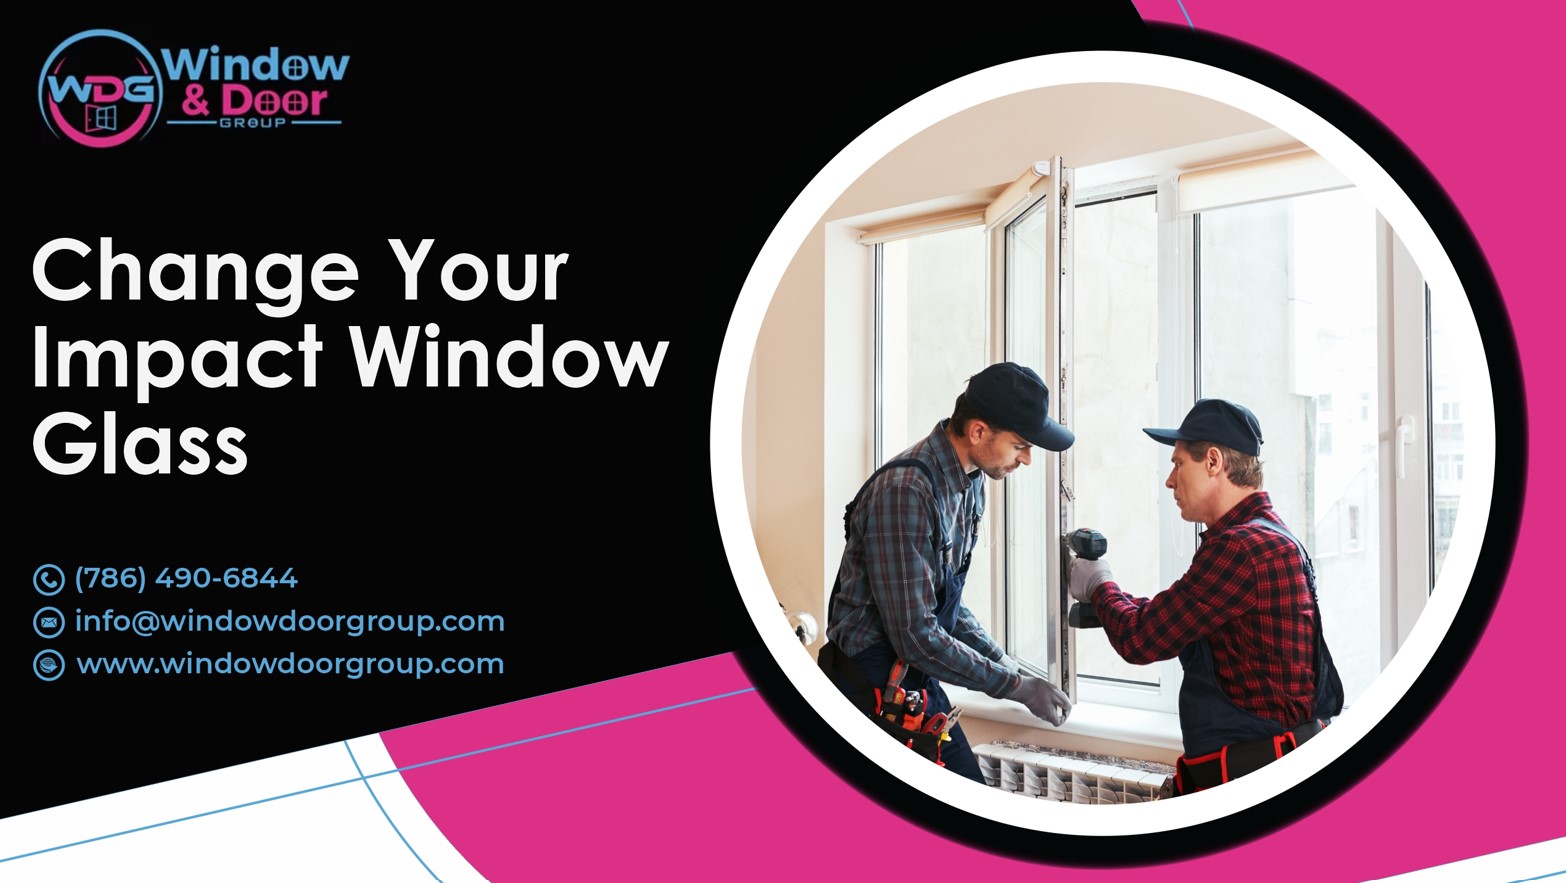 Is It Really Time To Change Your Impact Window Glass?